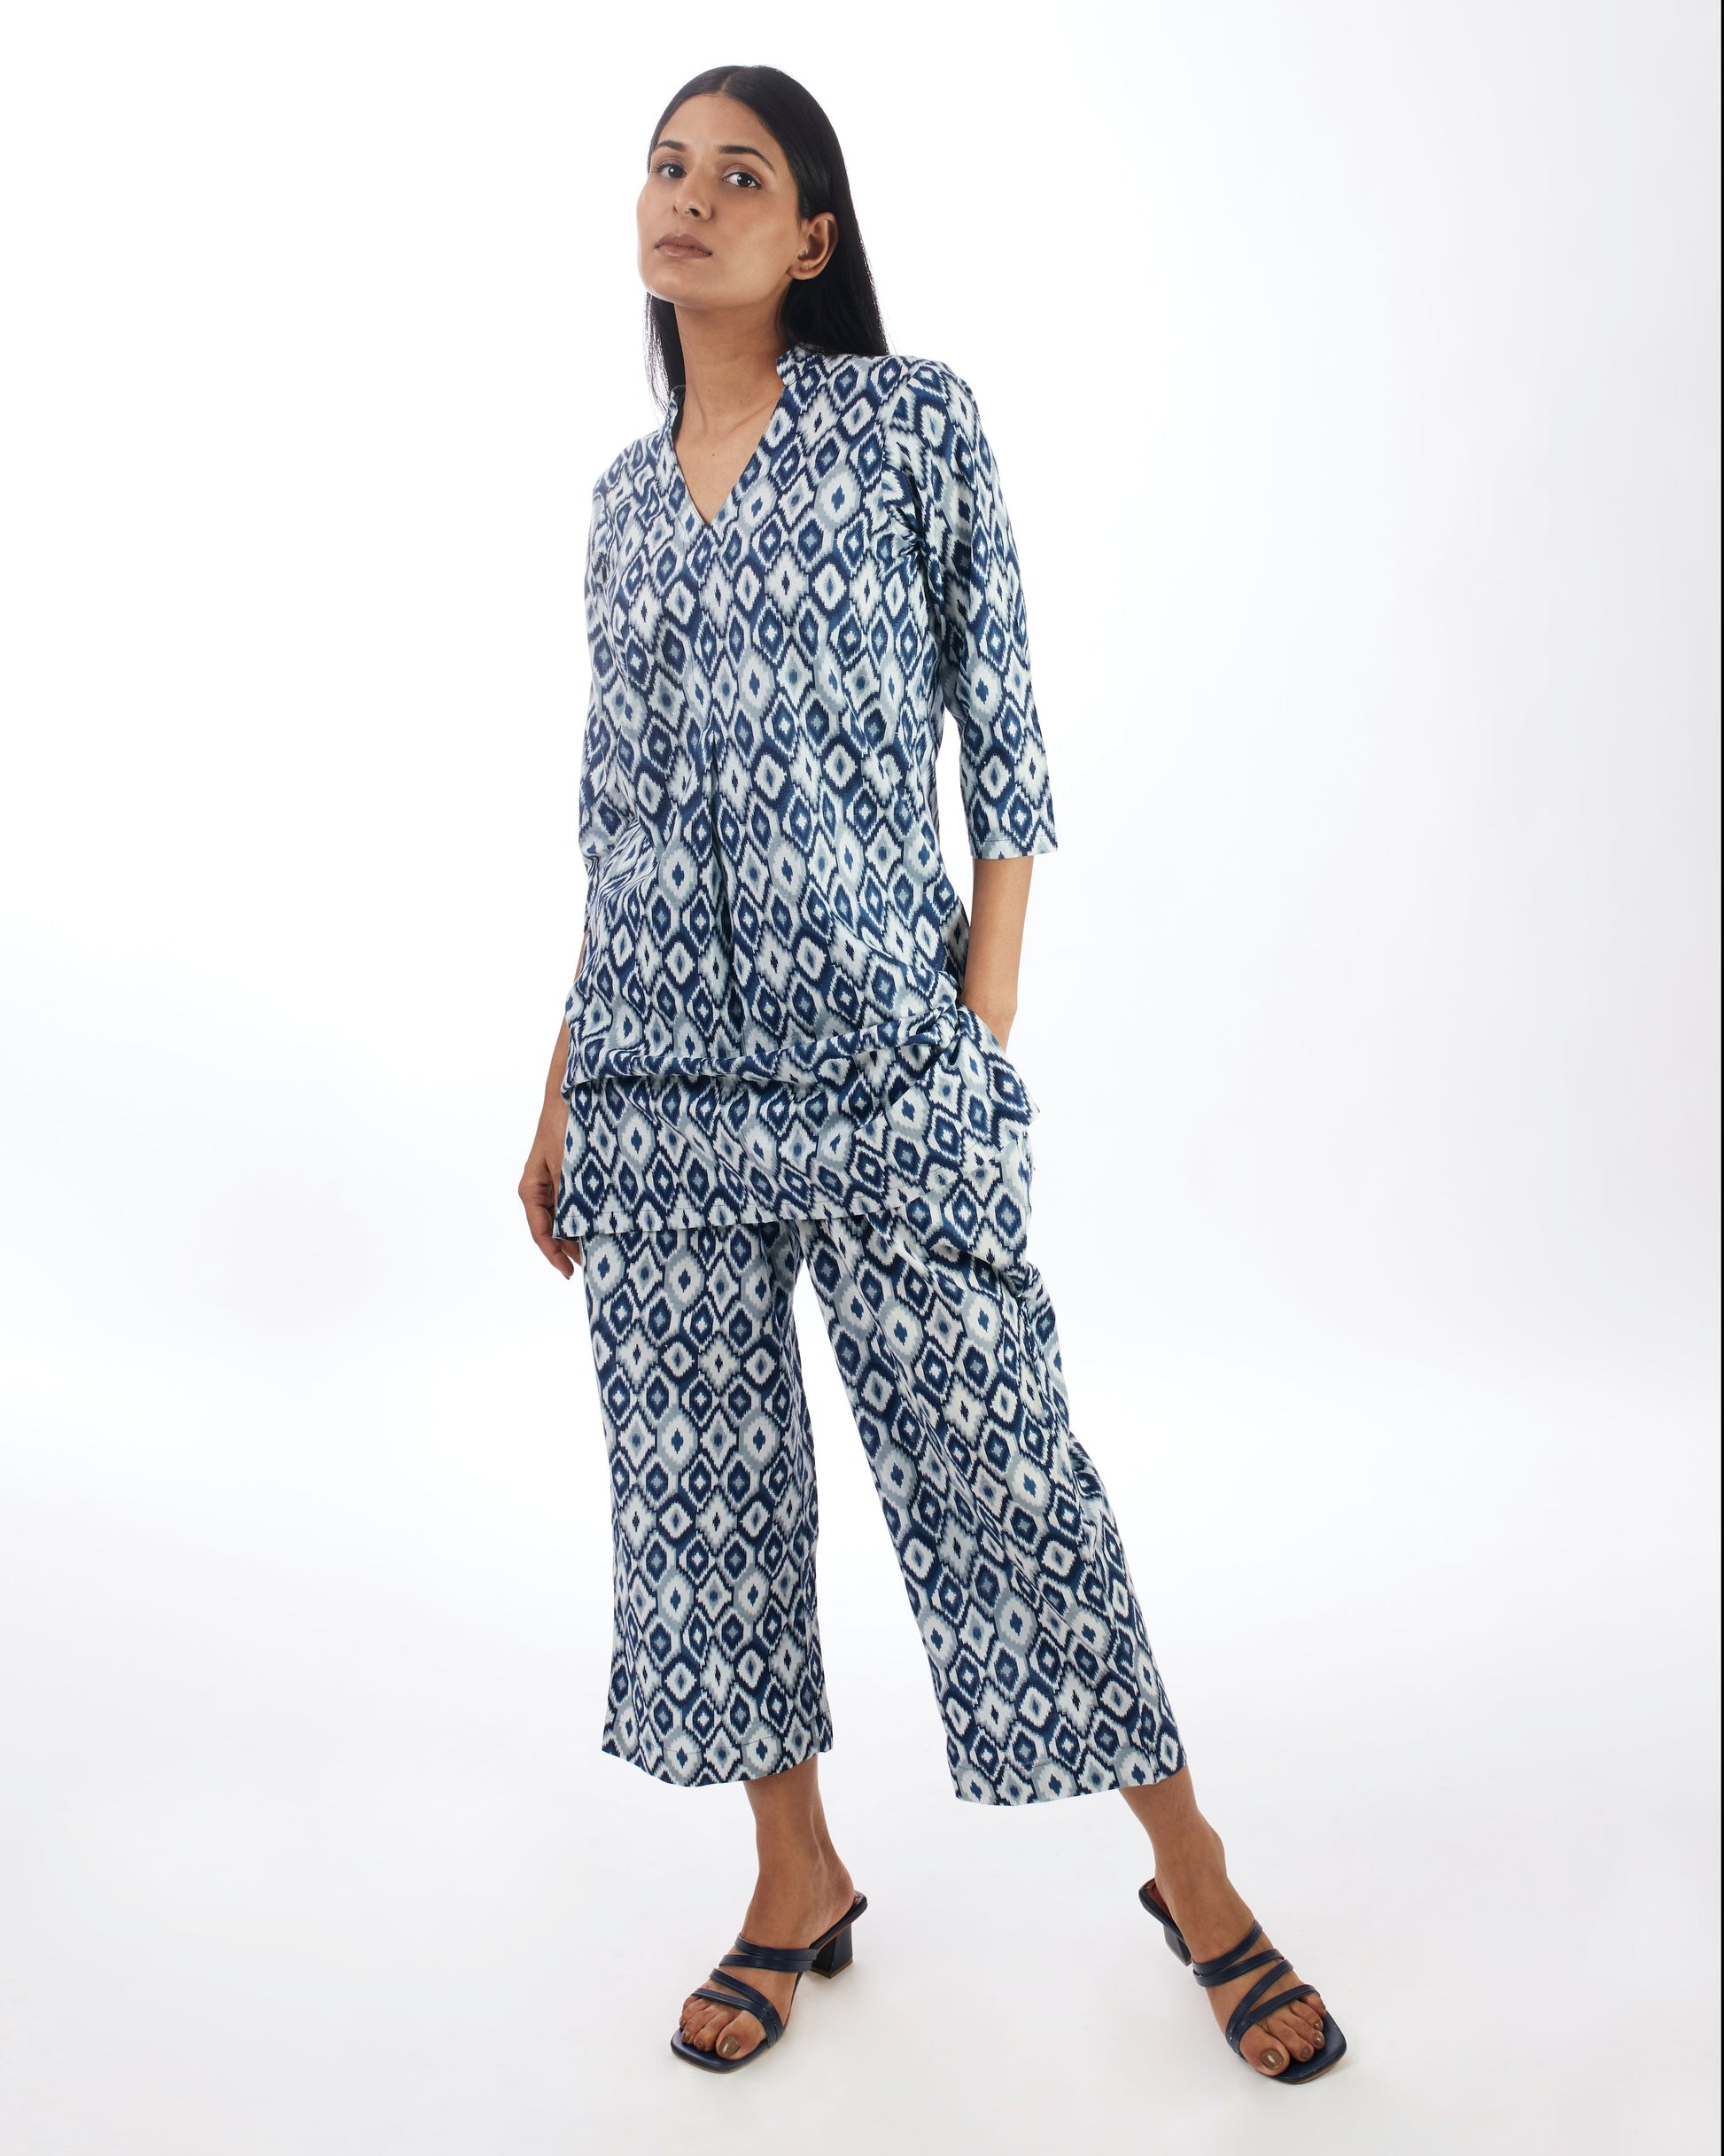 Blue Printed Top With White Pant Co-ord Set by Kamakhyaa with 100% pure cotton, Blue, Casual Wear, Co-ord Sets, FB ADS JUNE, Fitted At Waist, KKYSS, Naturally Made, Printed, Relaxed Fit, Summer Sutra, Womenswear at Kamakhyaa for sustainable fashion